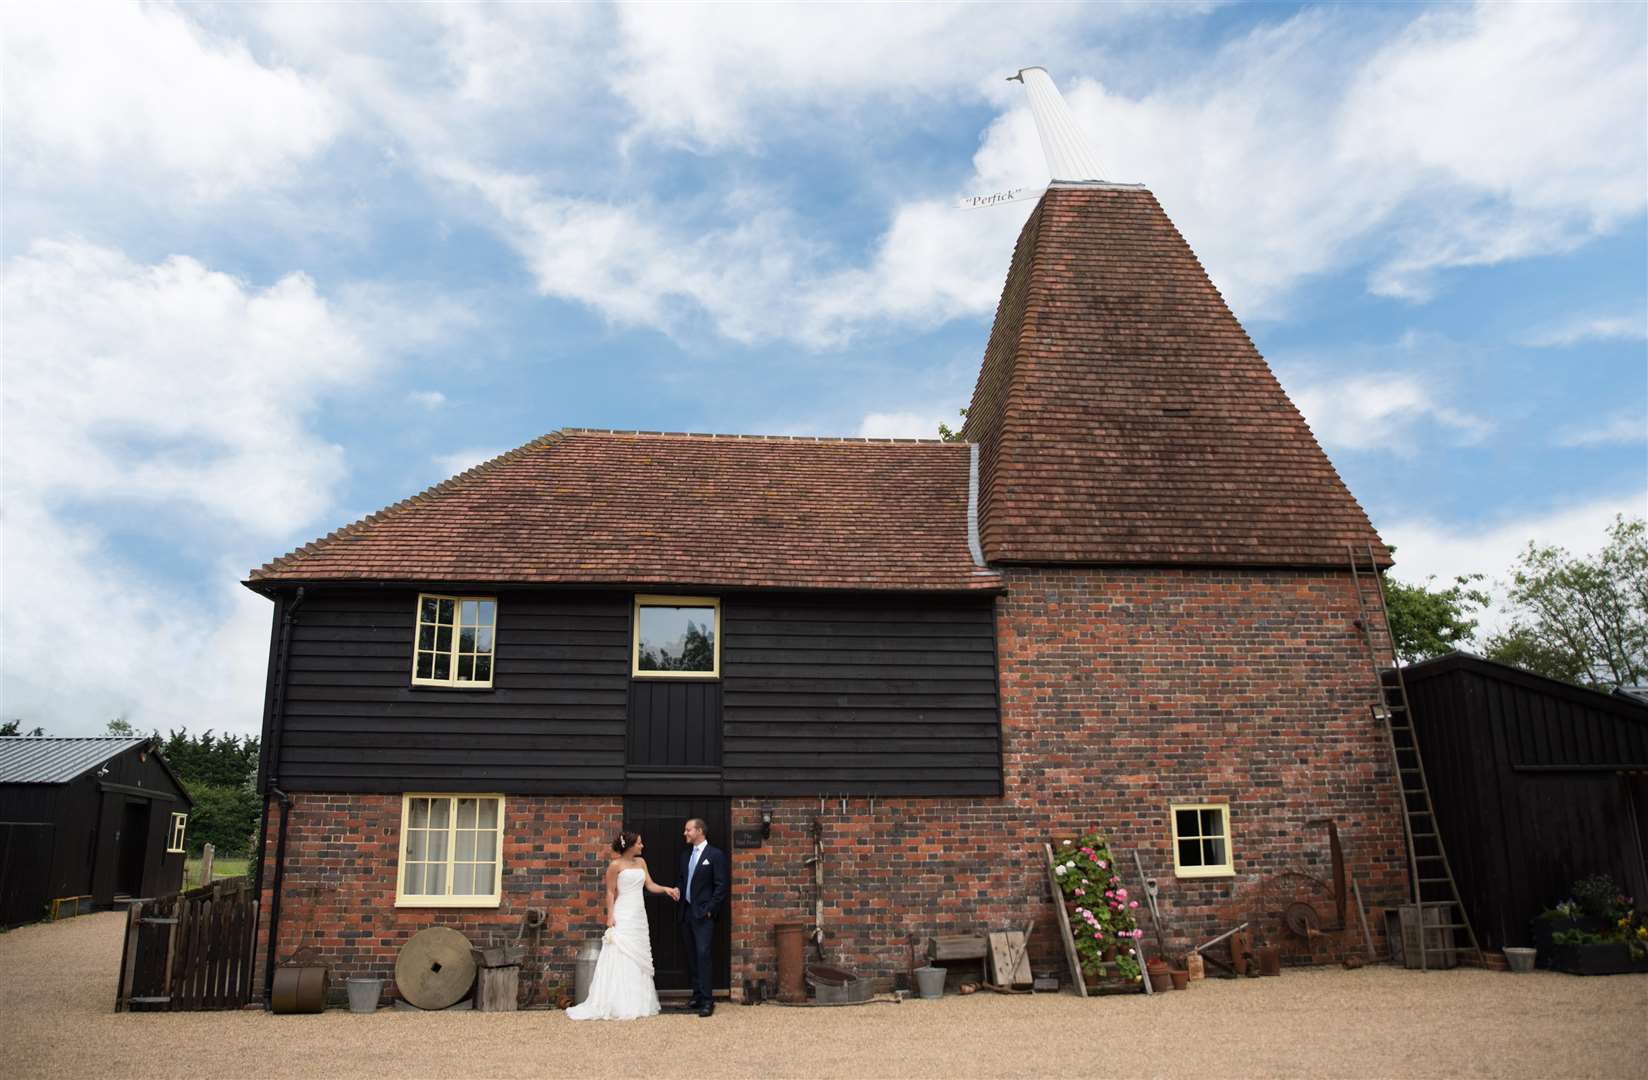 Weddings can now be carried out at Buss Farm in Bethersden - the TV home of the Larkins